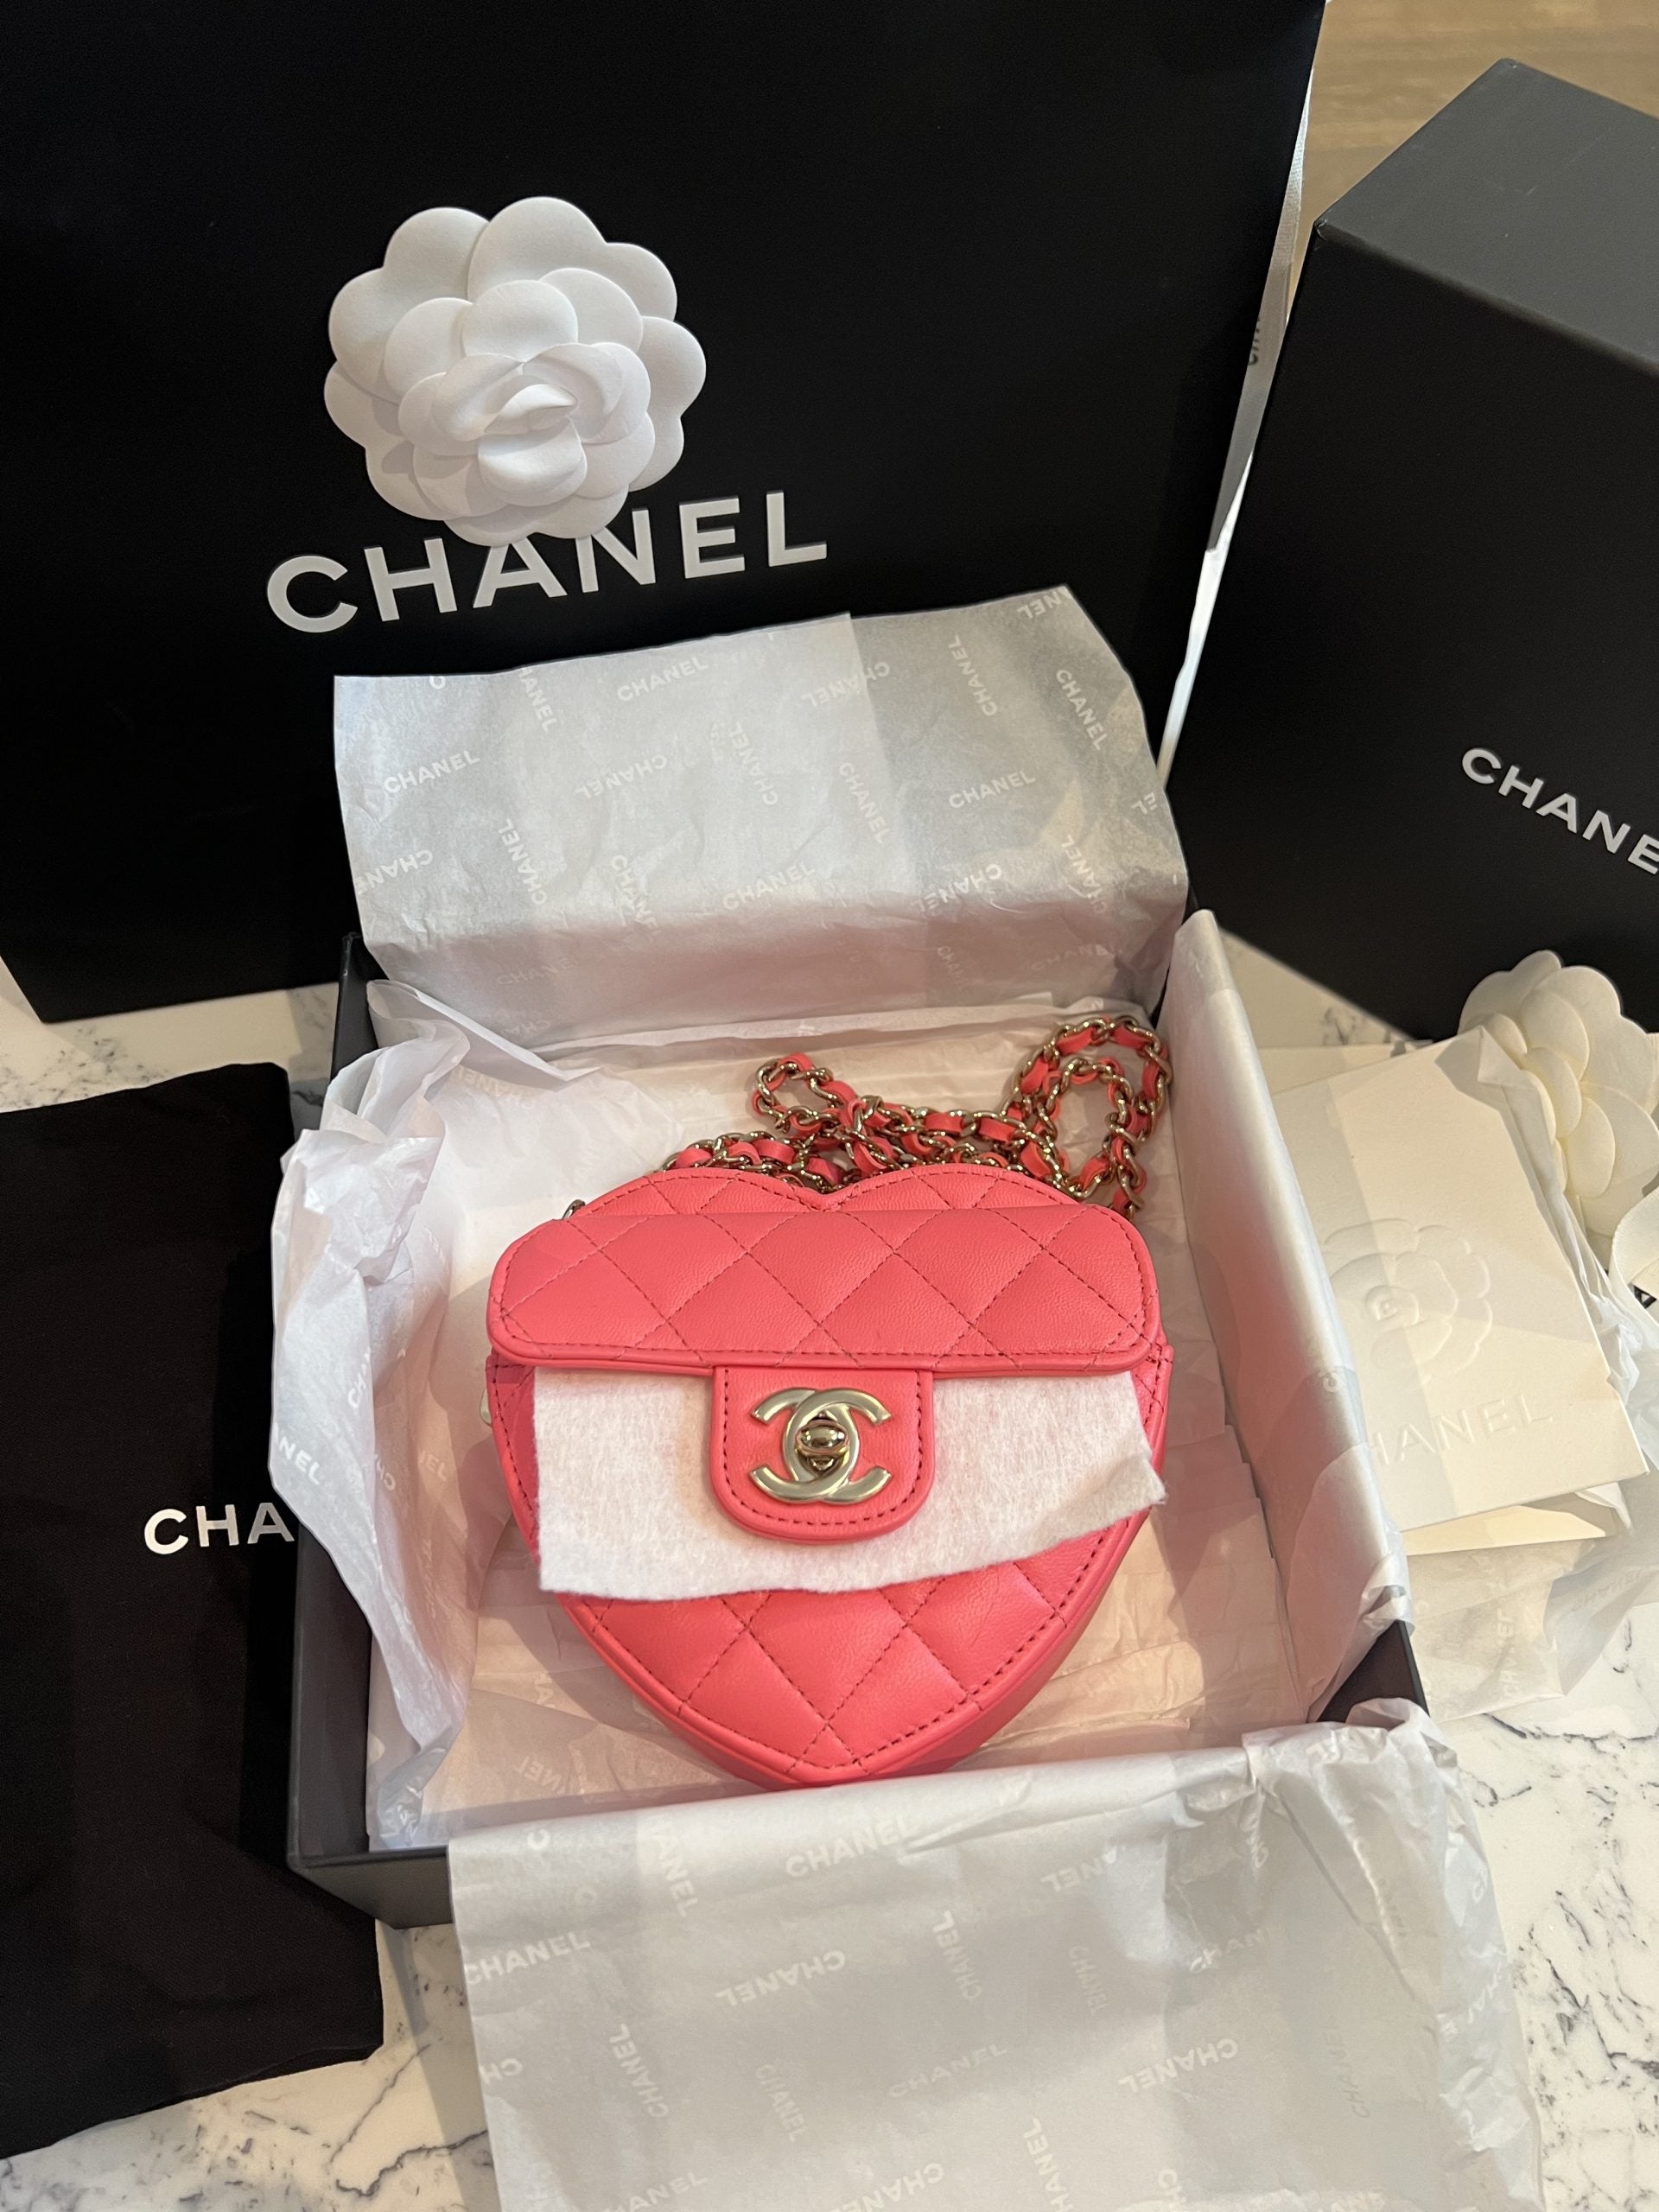 chanel party favor bags